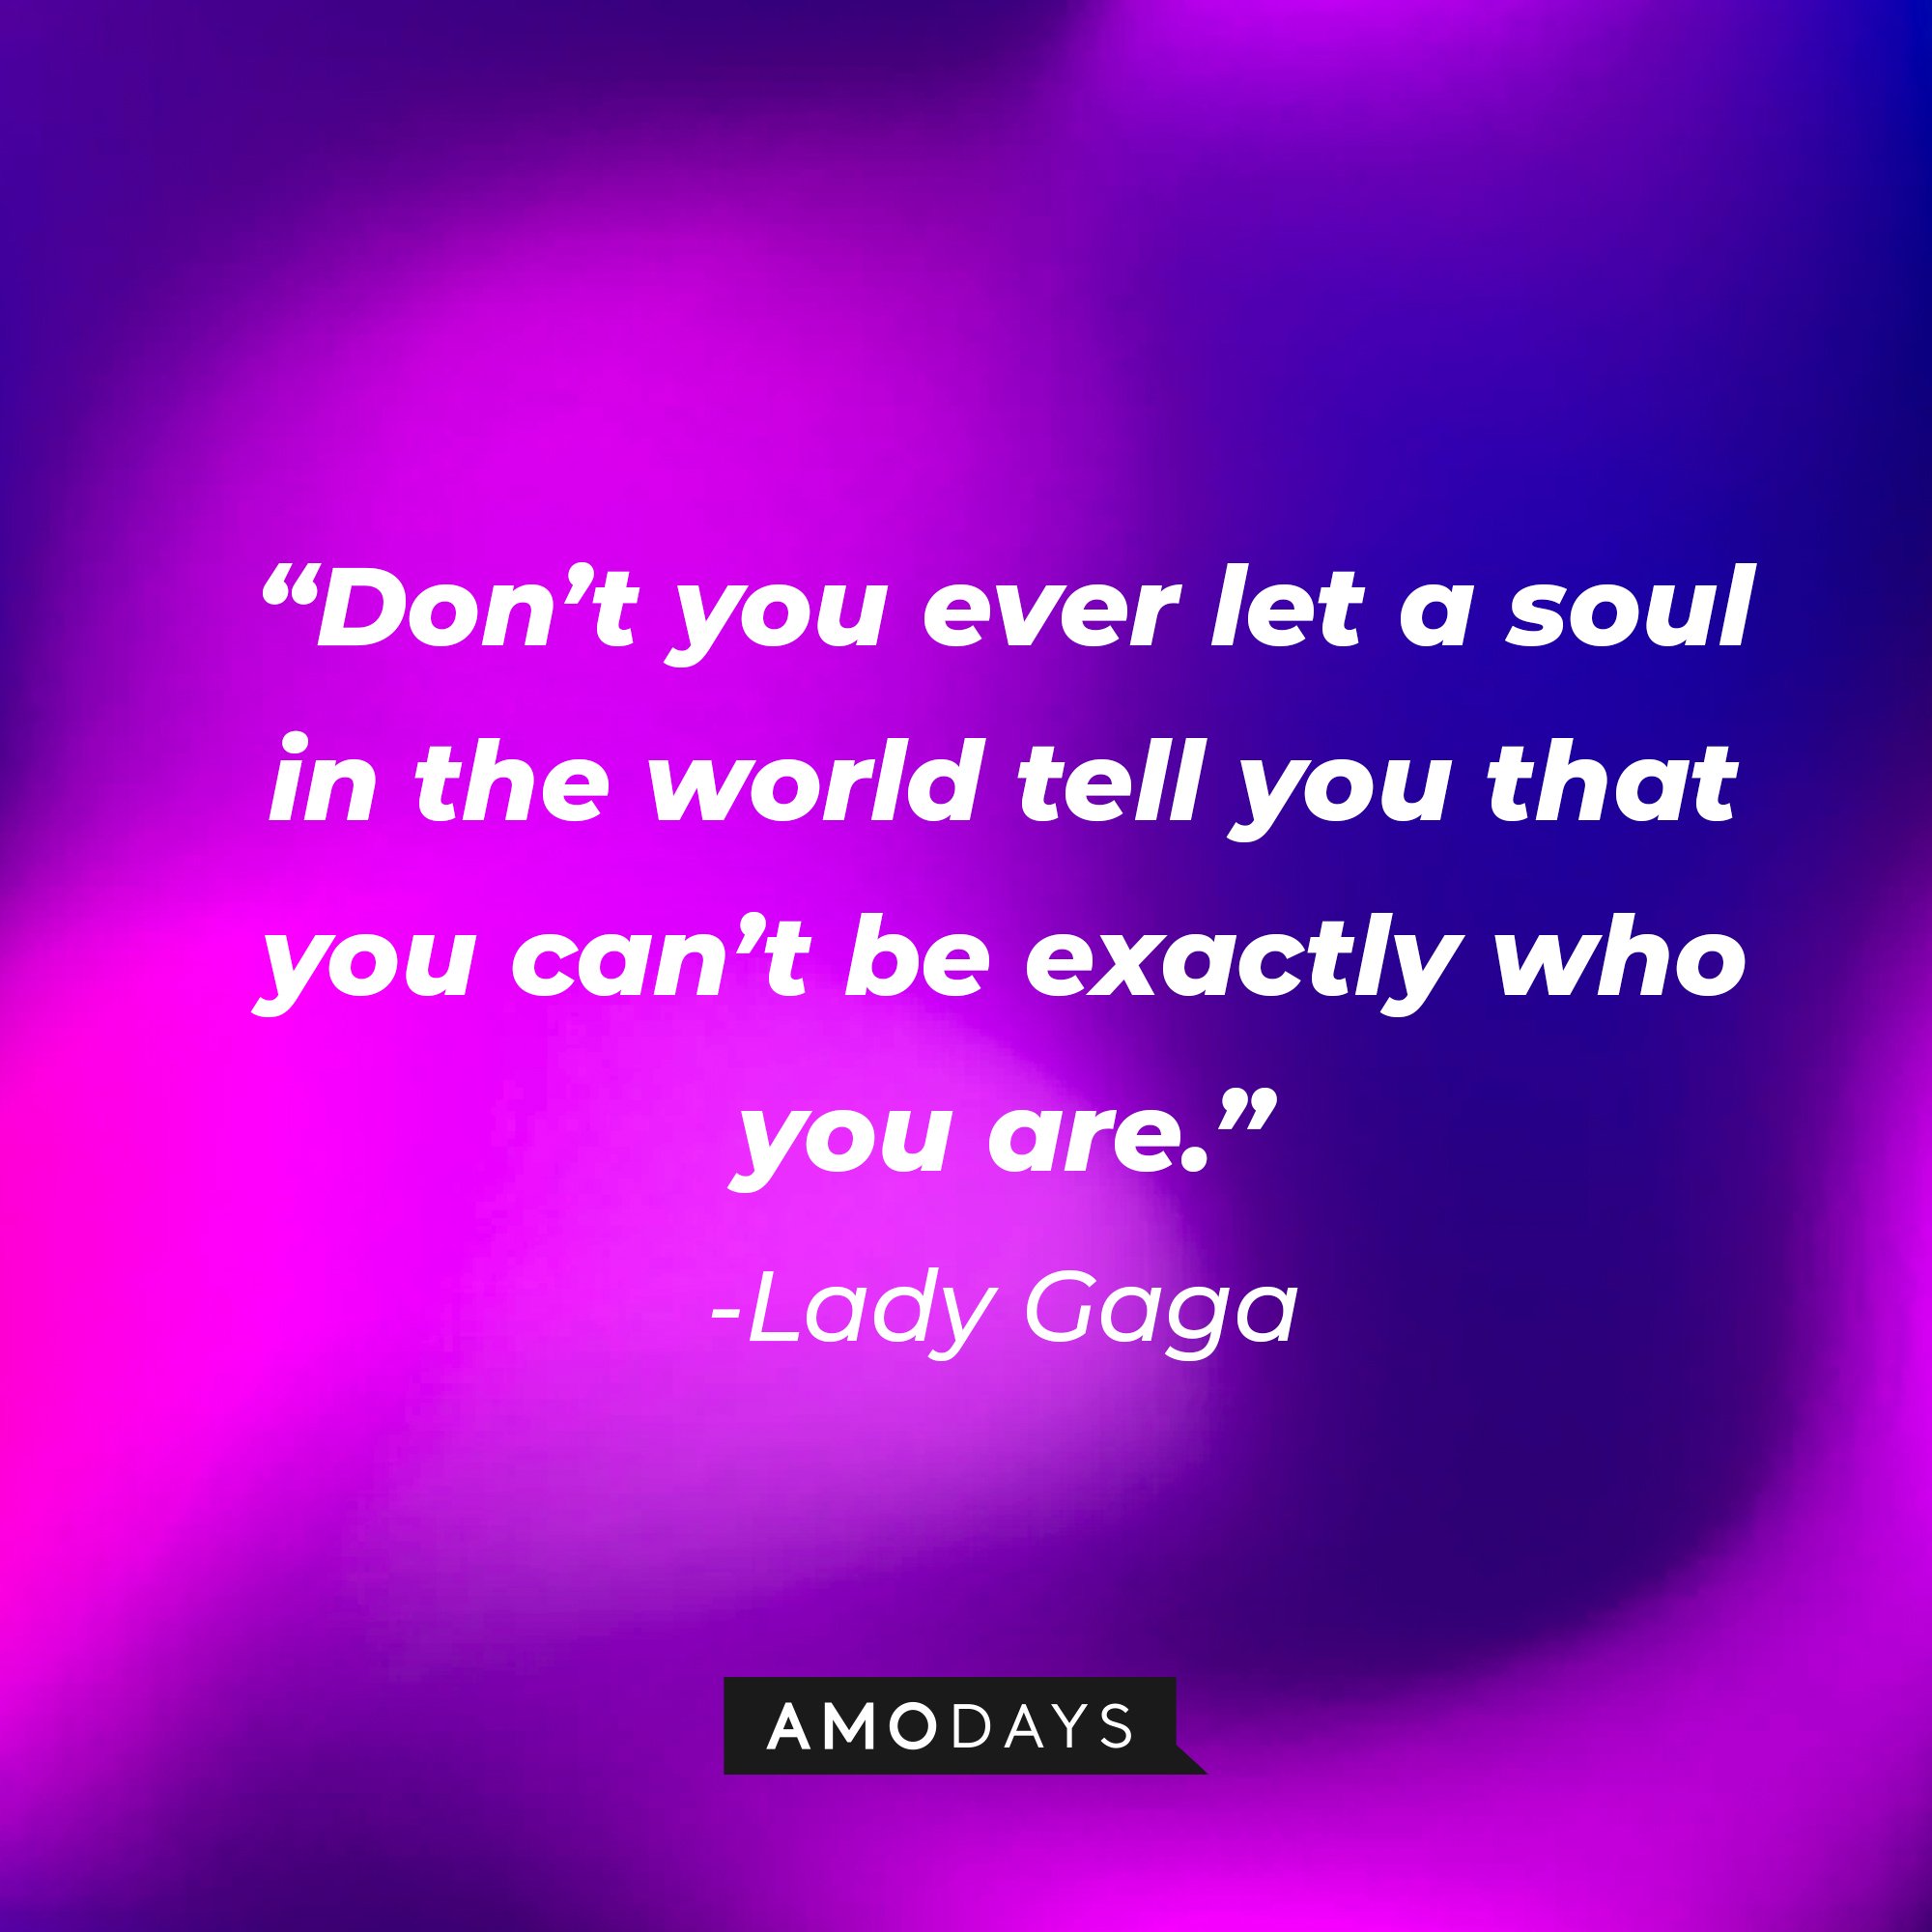 Lady Gaga's quote: "Don't you ever let a soul in the world tell you that you can't be exactly who you are." | Image: AmoDays 